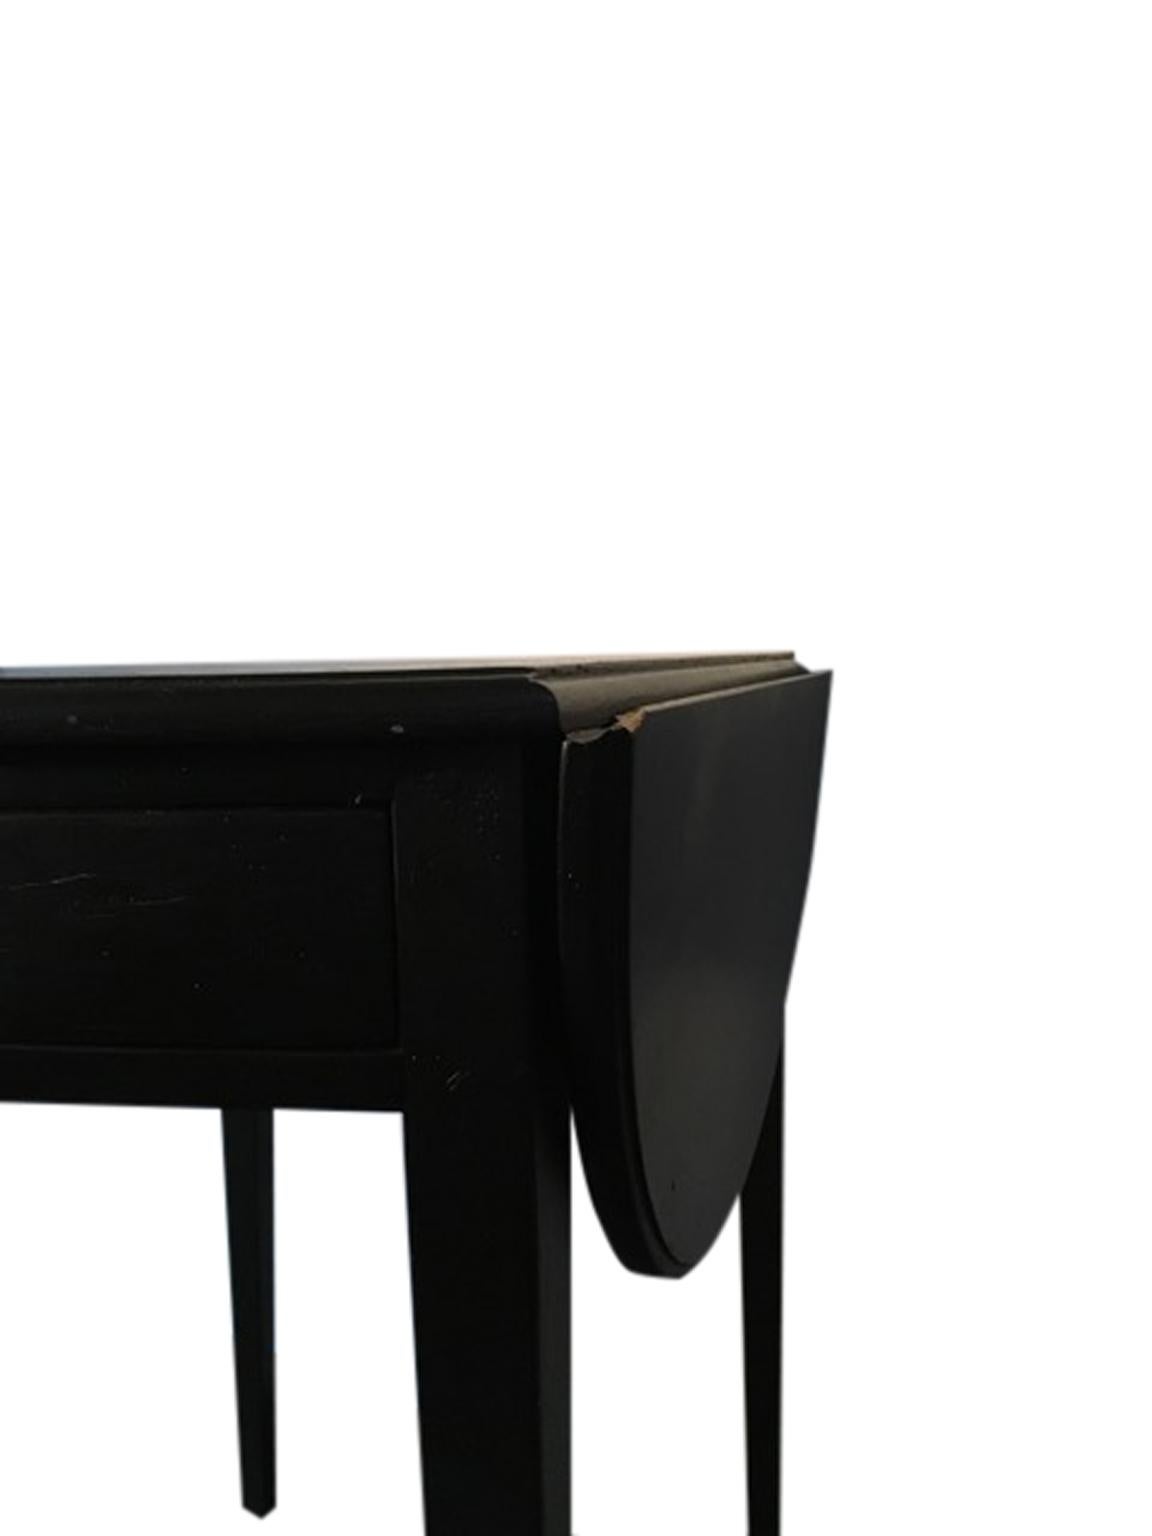 Italy Walnut Drop-Leaf Table Black Lacquered Contemporary Production In Stock 7